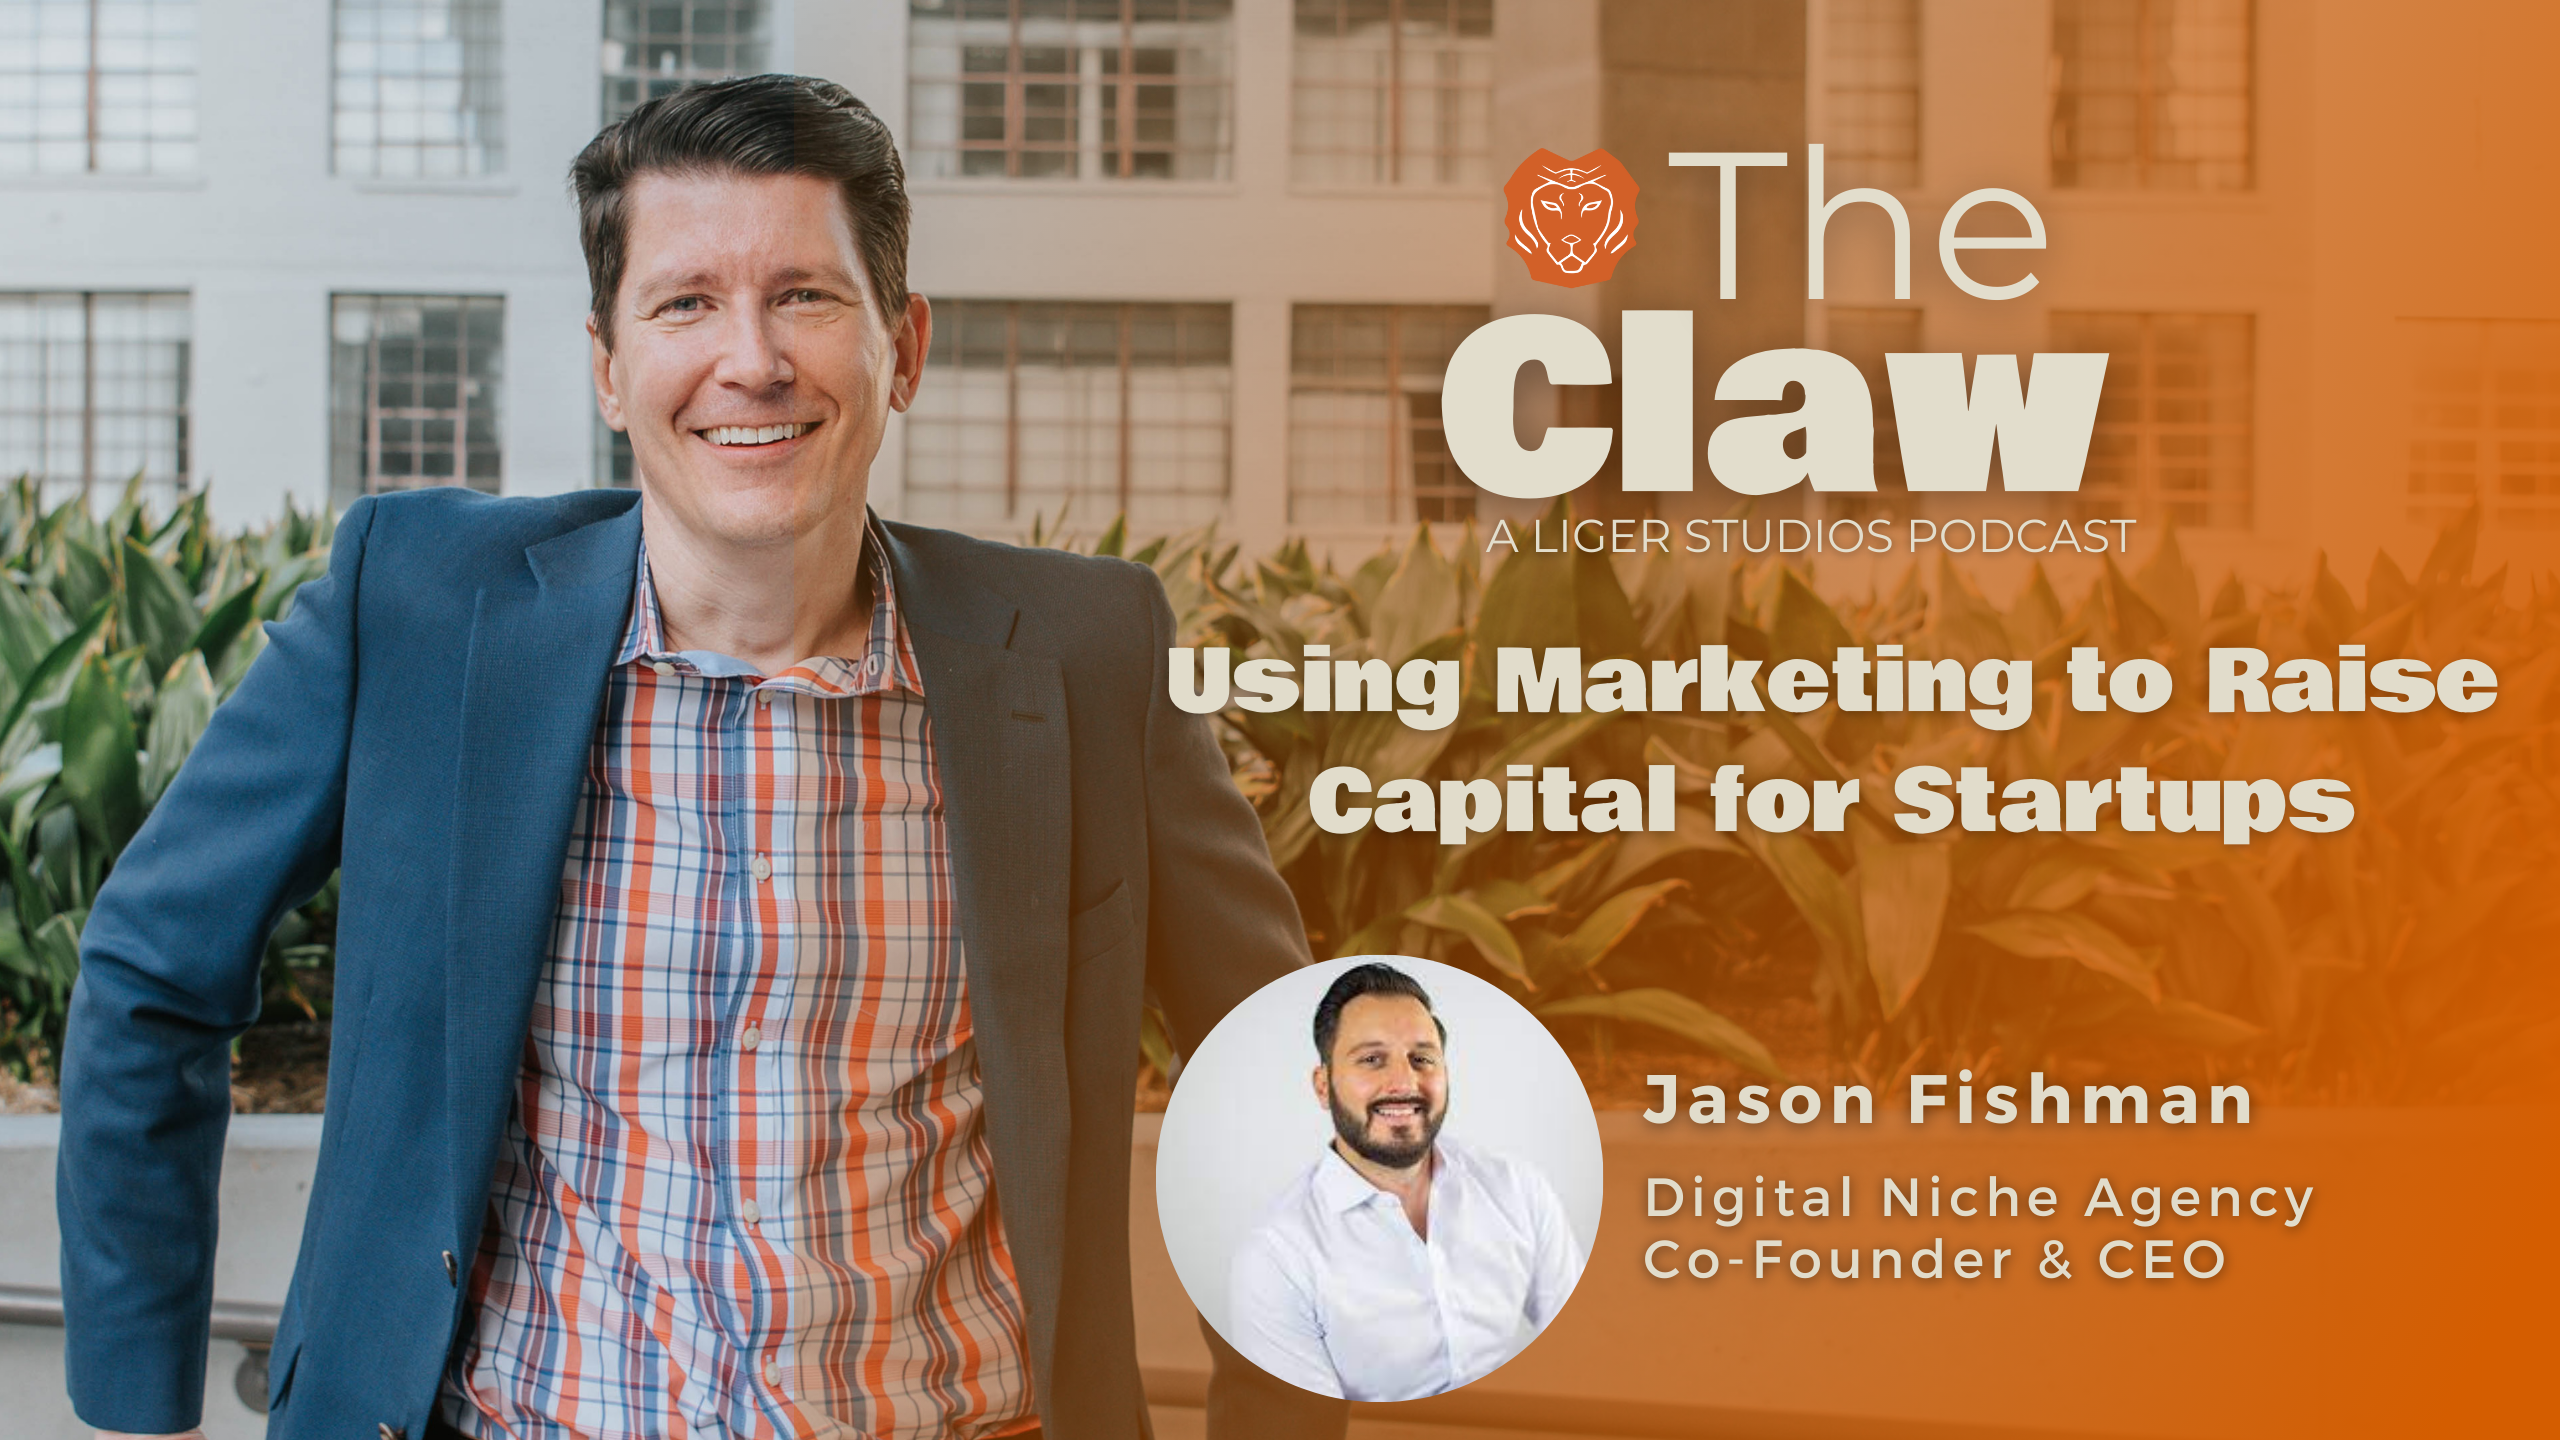 The Claw Podcast | Using Marketing to Raise Capital for Startups with Jason Fishman